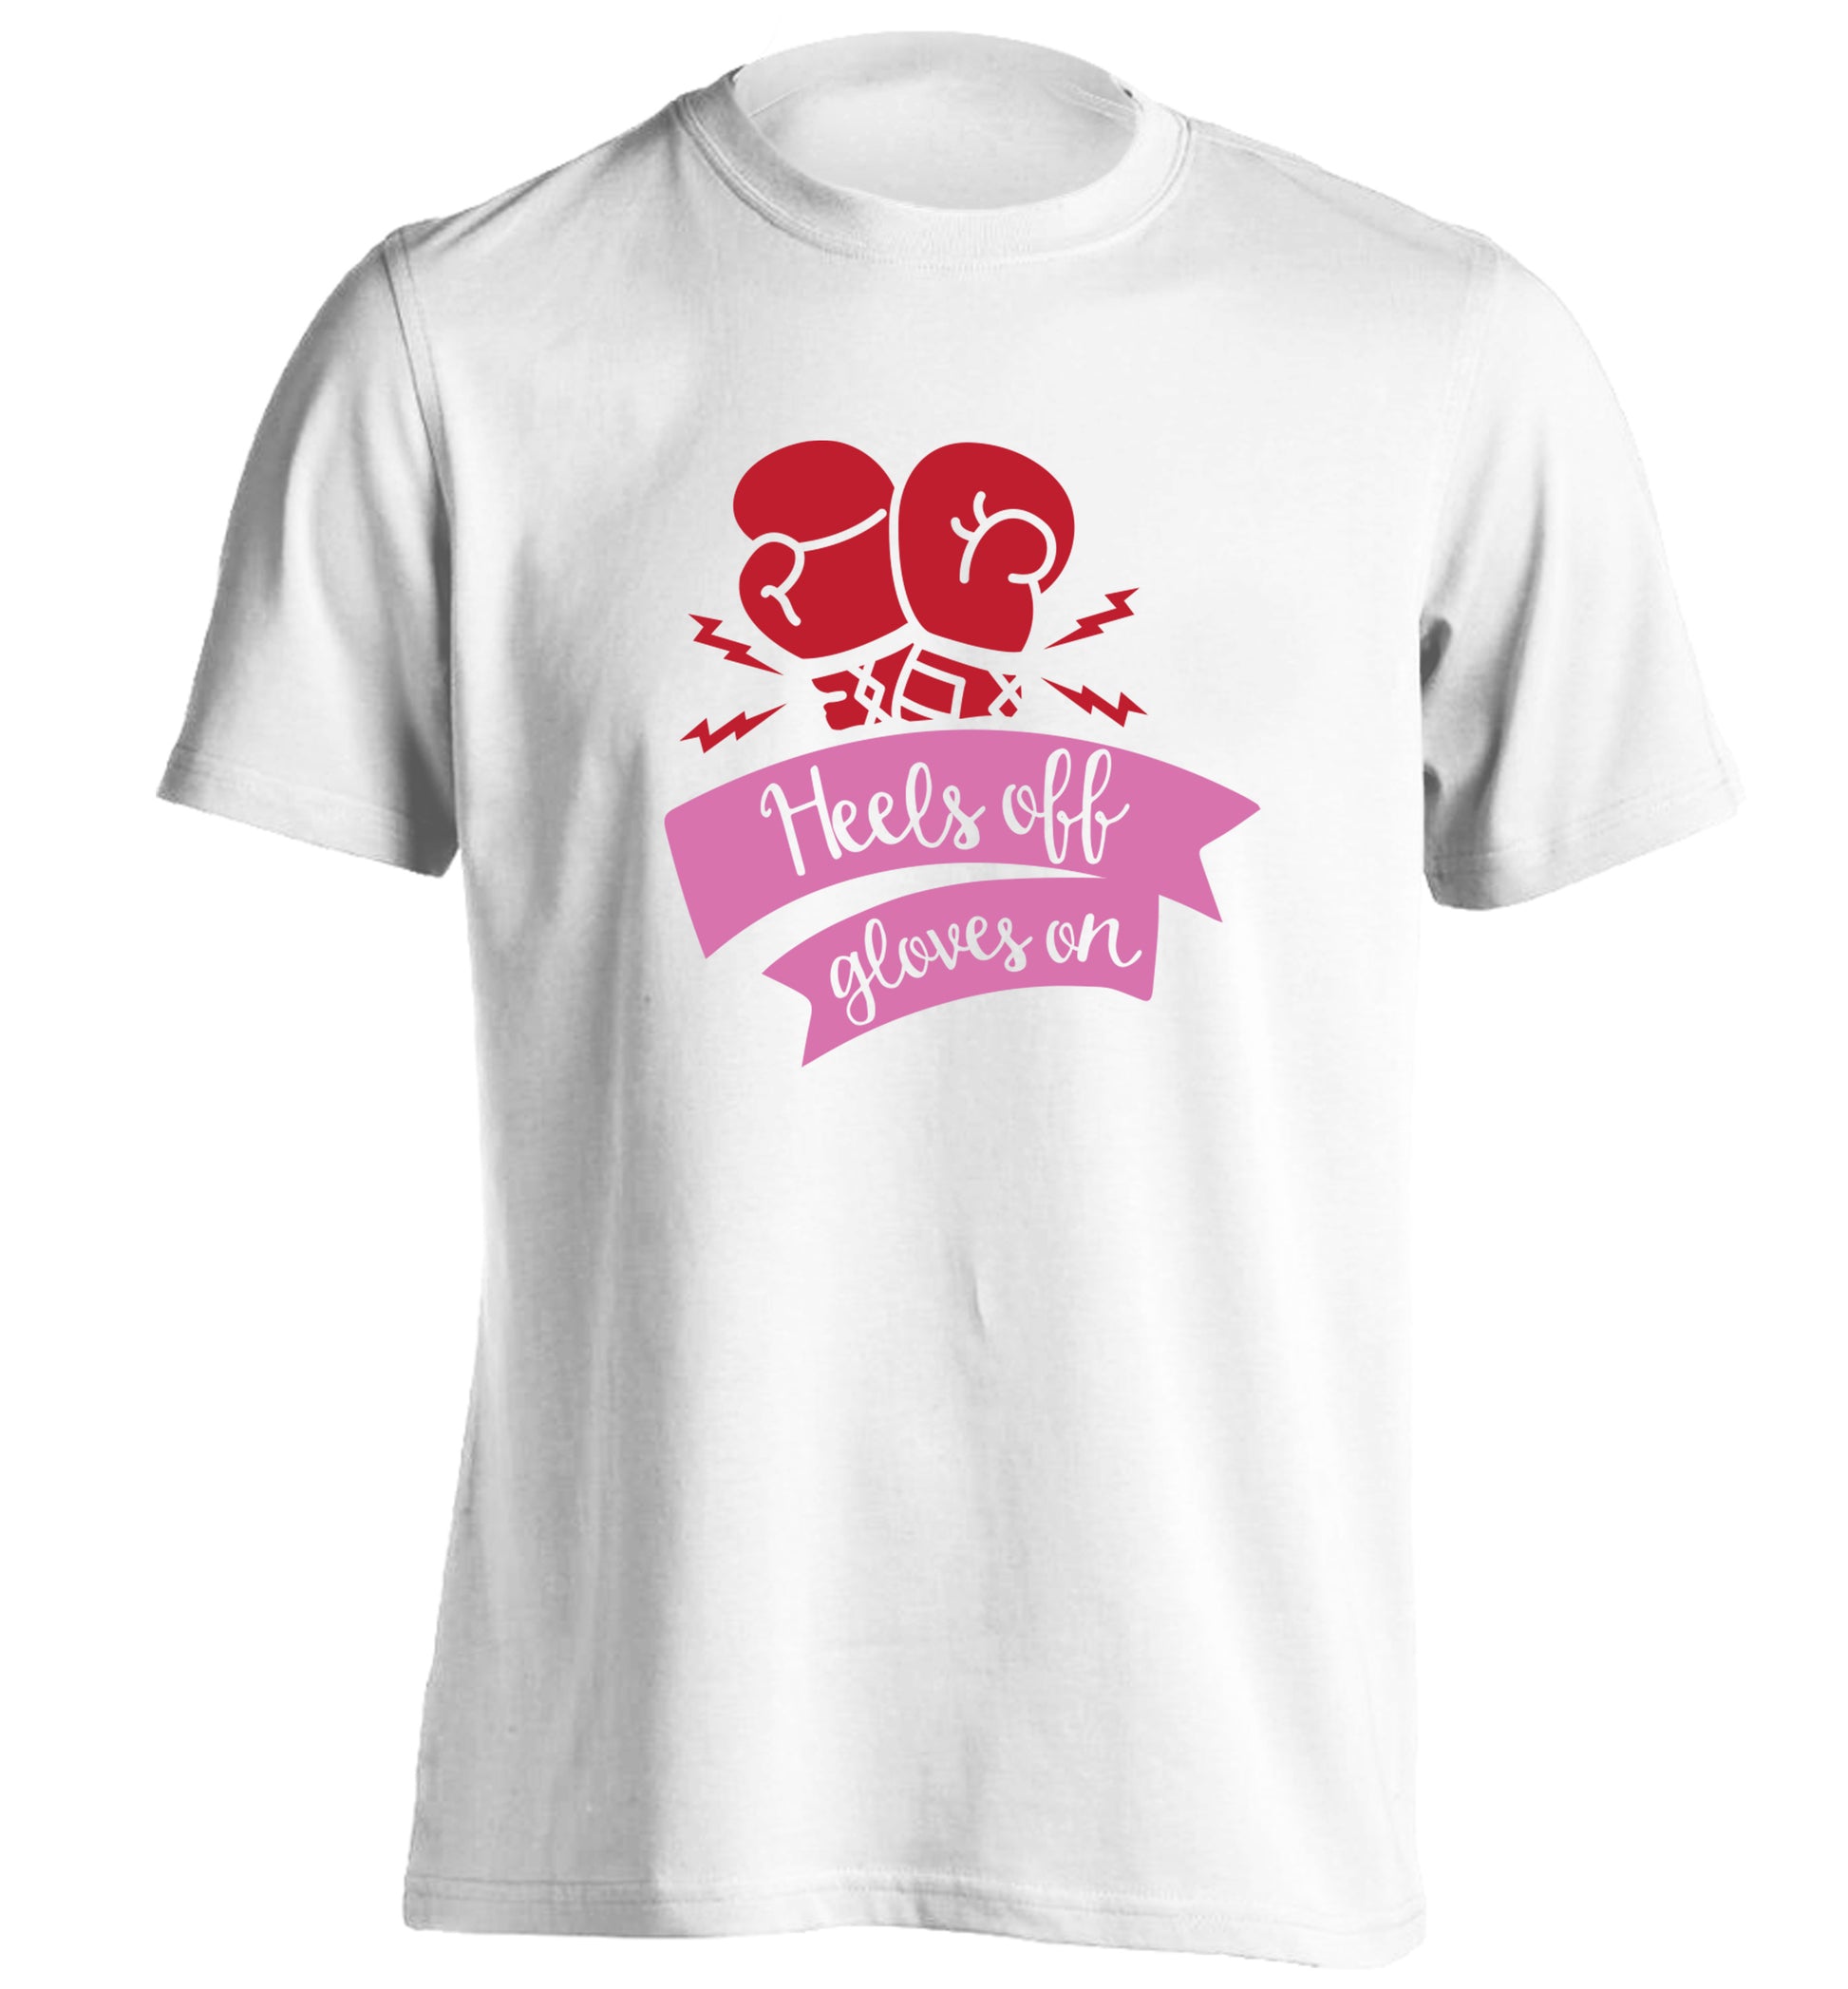 Heels off gloves on adults unisex white Tshirt 2XL